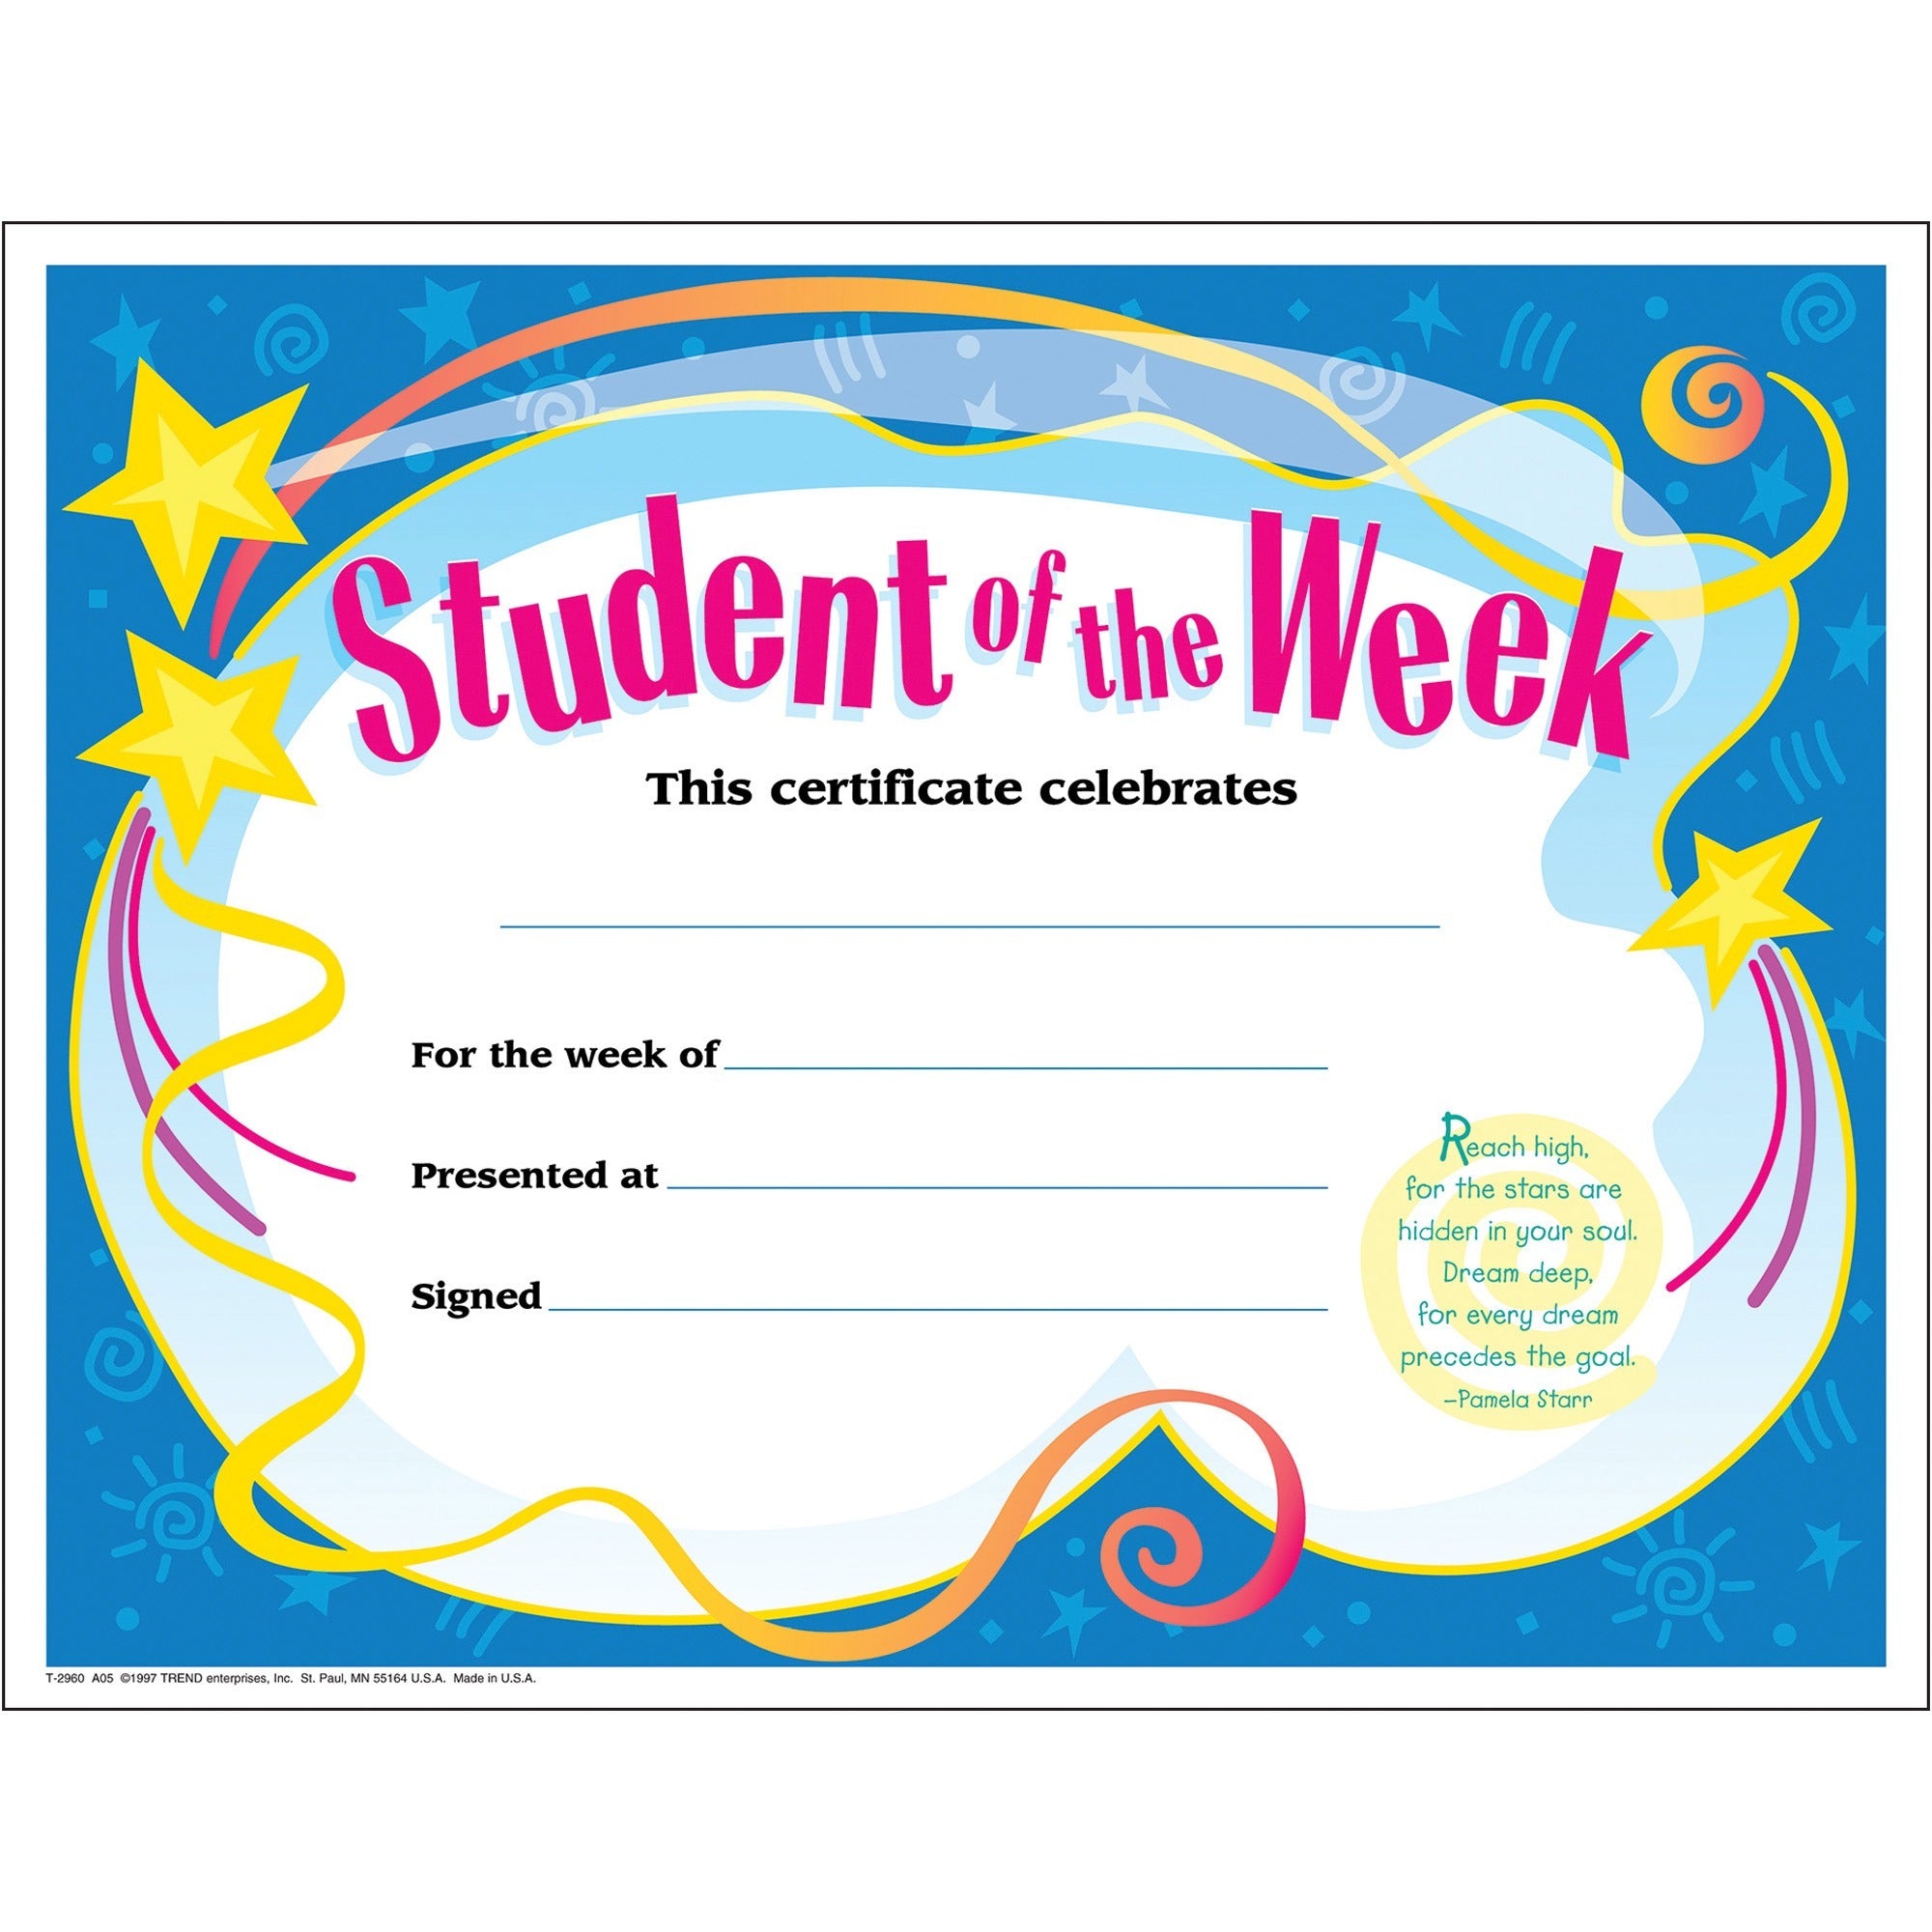 Trend Student of The Week Award Certificate - "Student of the Week" - 8.5" x 11" - 30 / Pack - 